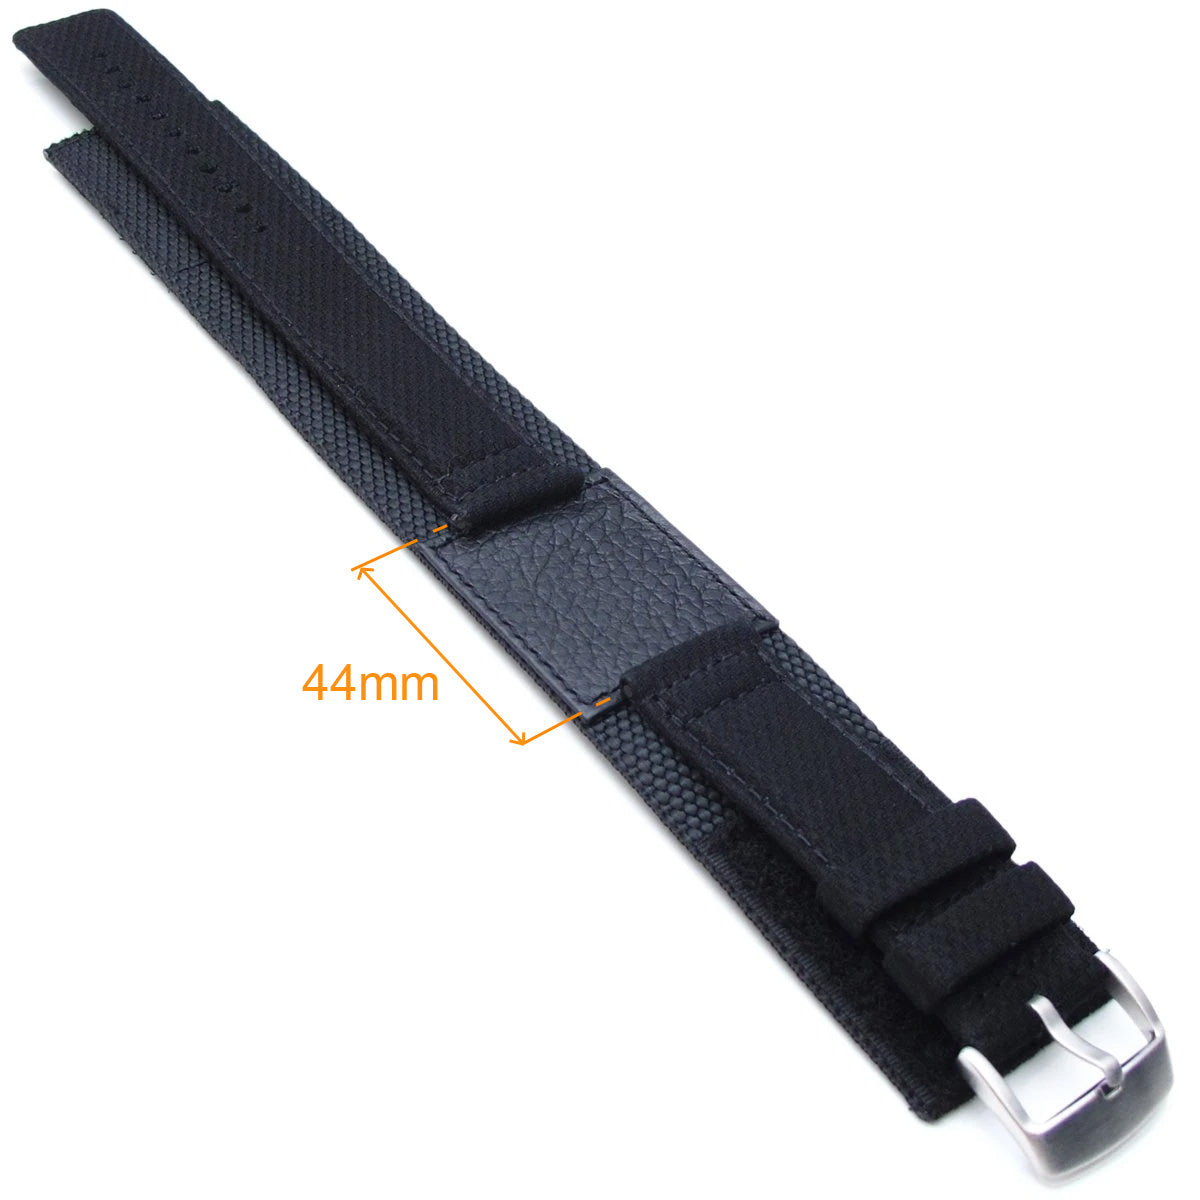 MiLTAT 24mm Double Layer Nylon Black Tactical Velcro Watch Strap, design for 44mm Panerai Watches